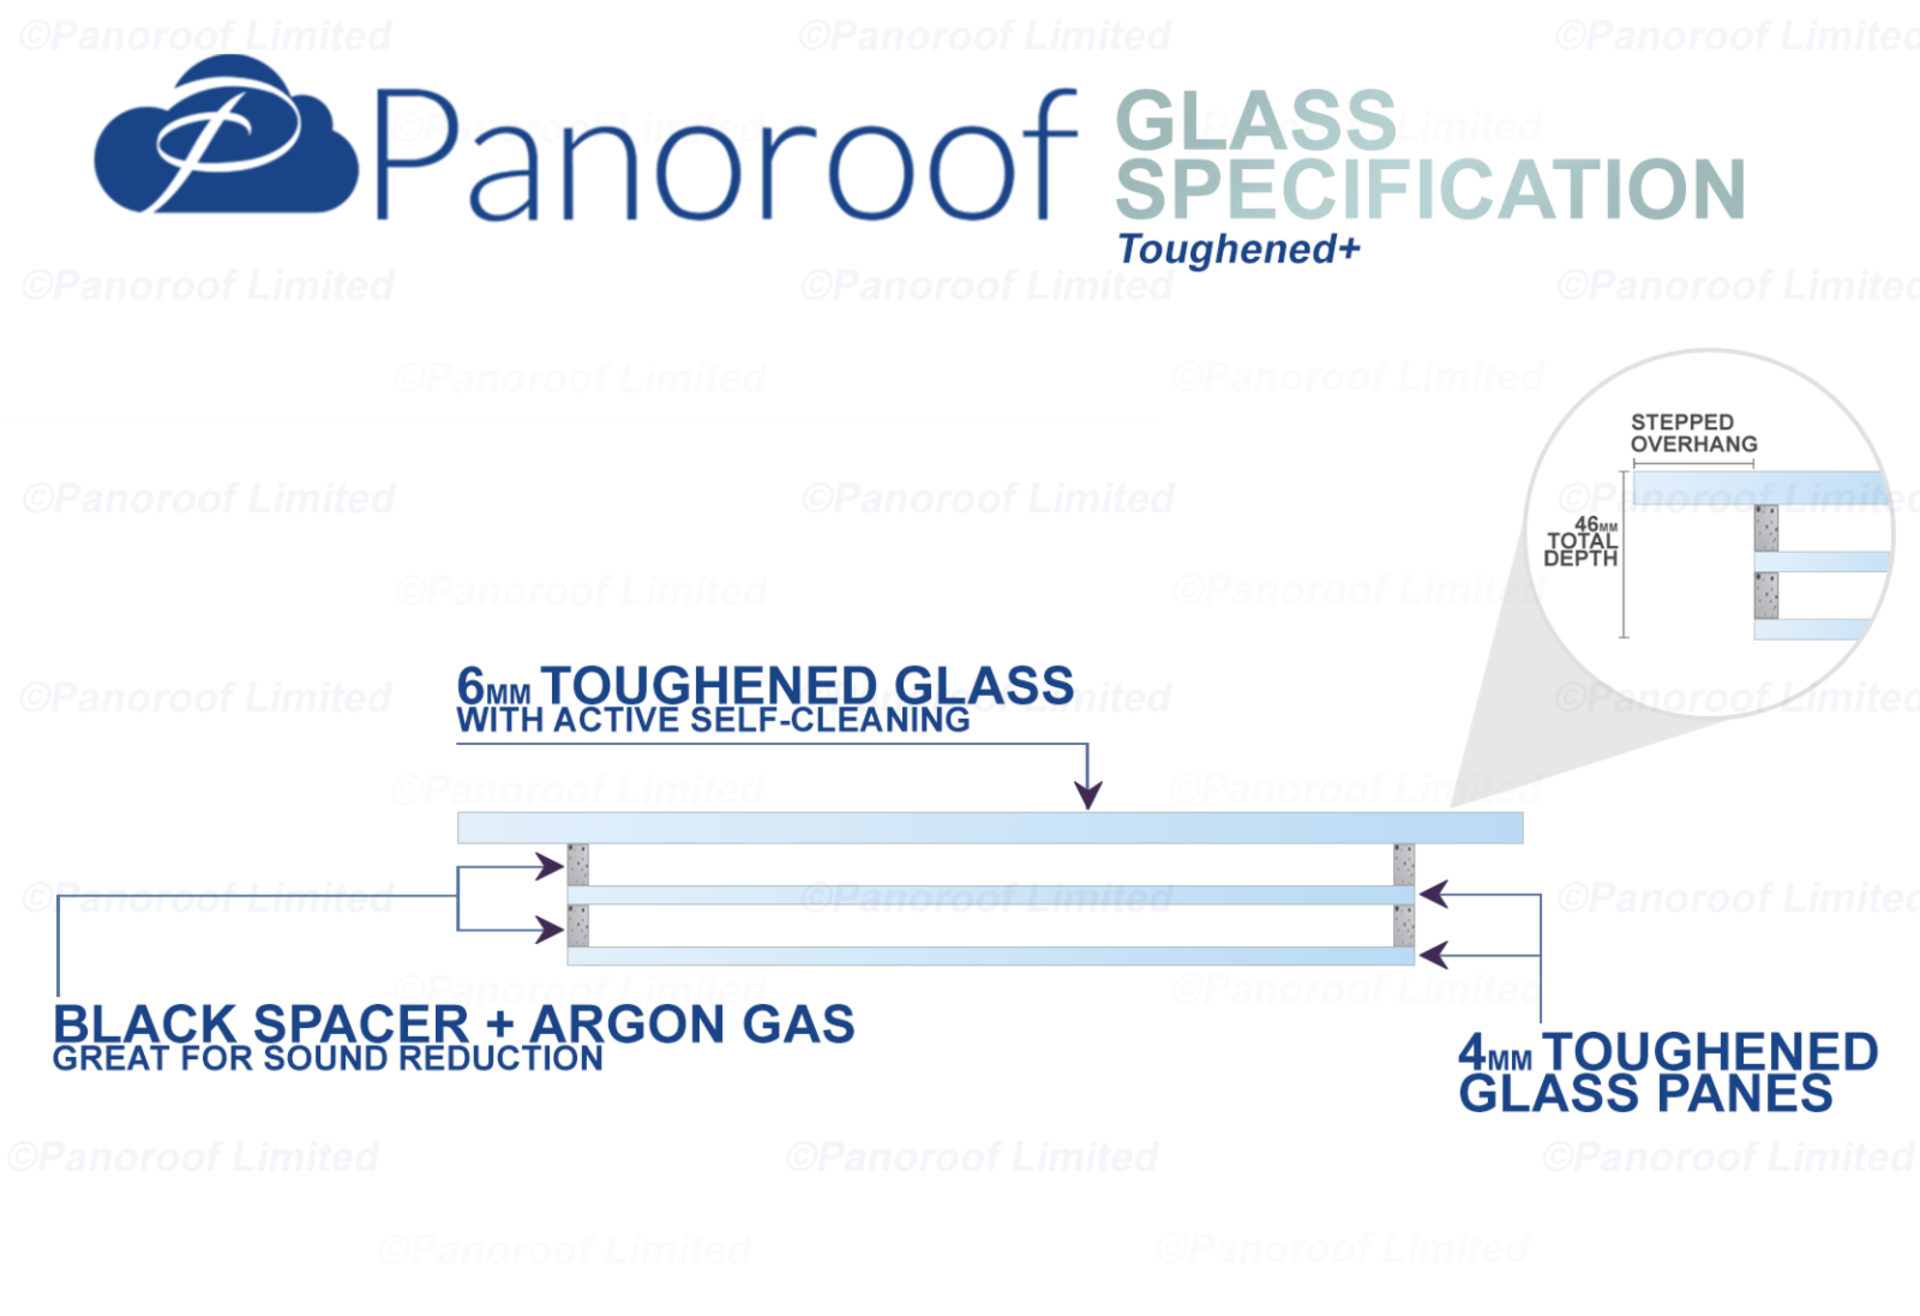 """Panoroof Triple Glazed Self Cleaning 1000x1200mm (inside Size Visable glass area) Seamless - Image 4 of 6